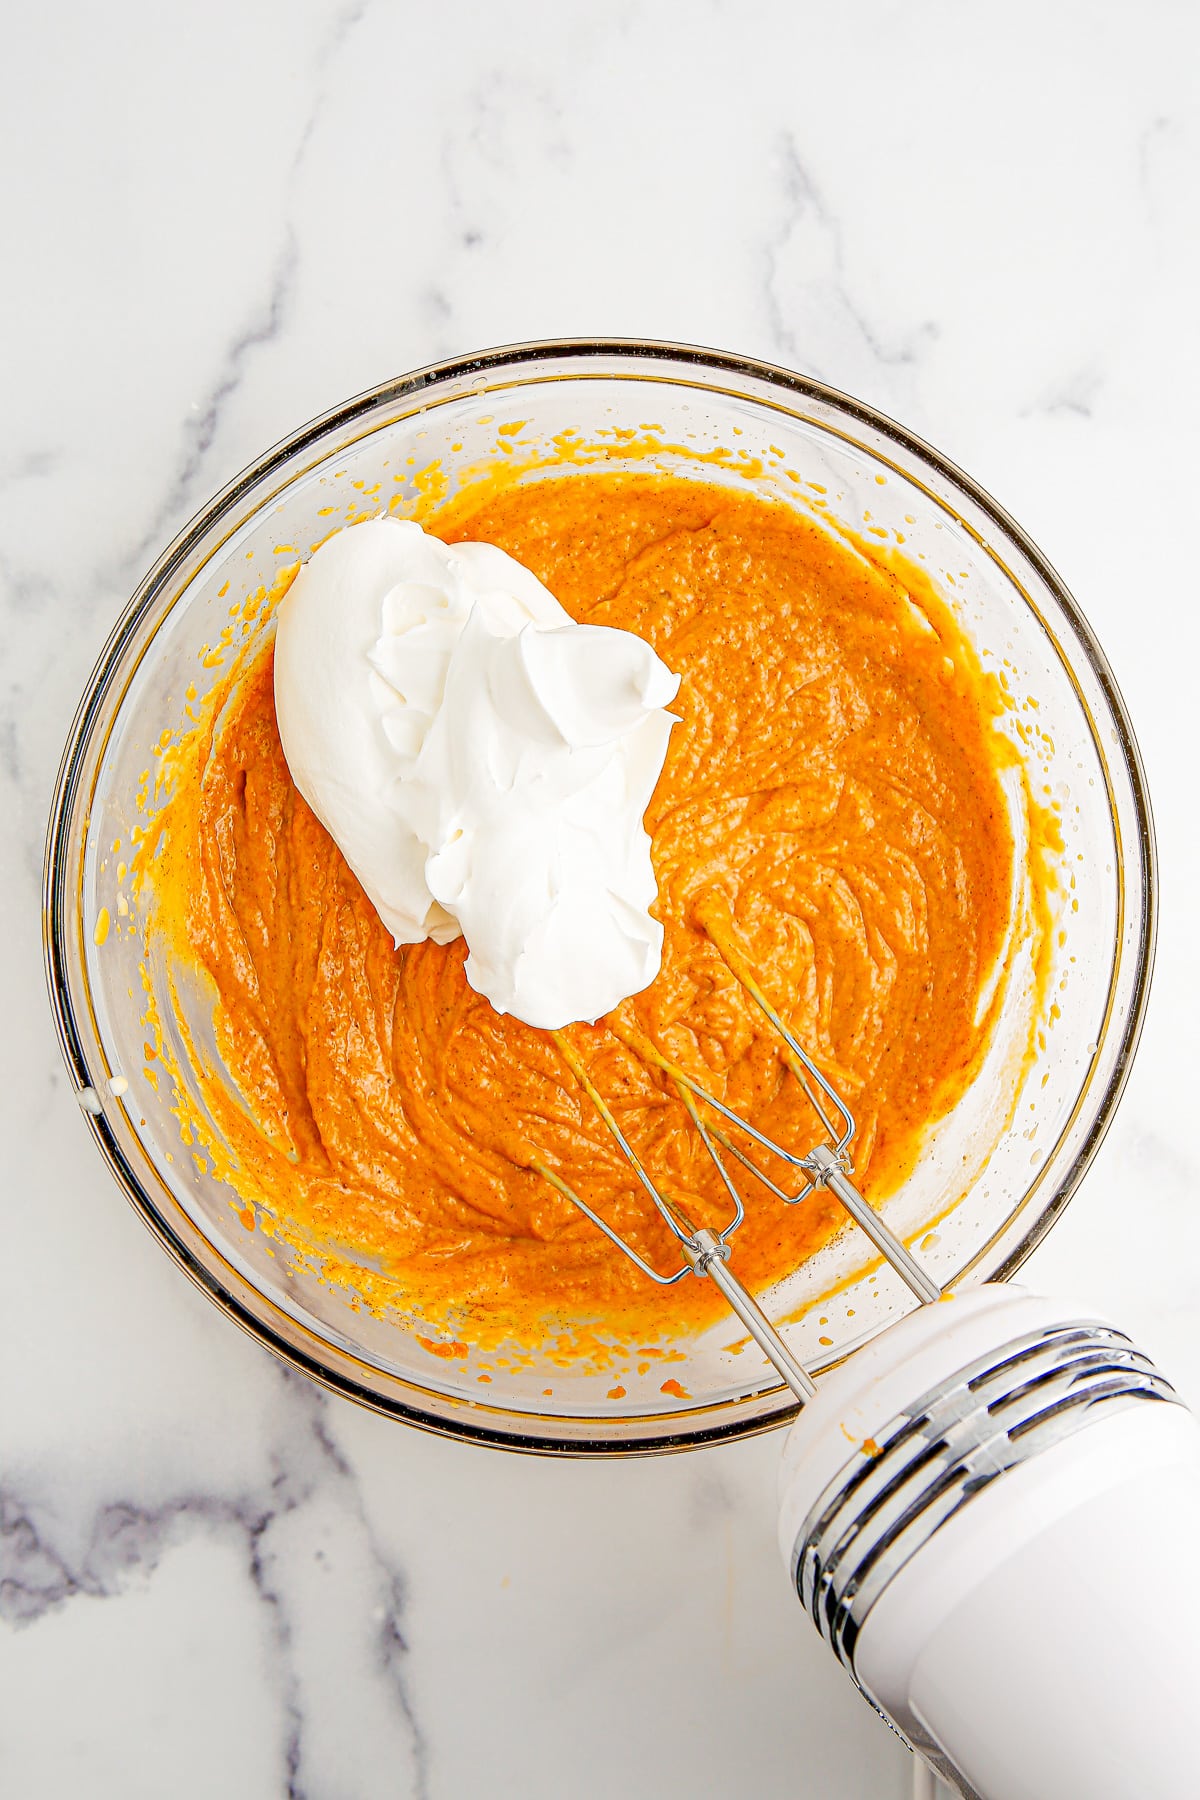 Whipped topping being mixed with an electric mixer in a bowl with pumpkin pudding.